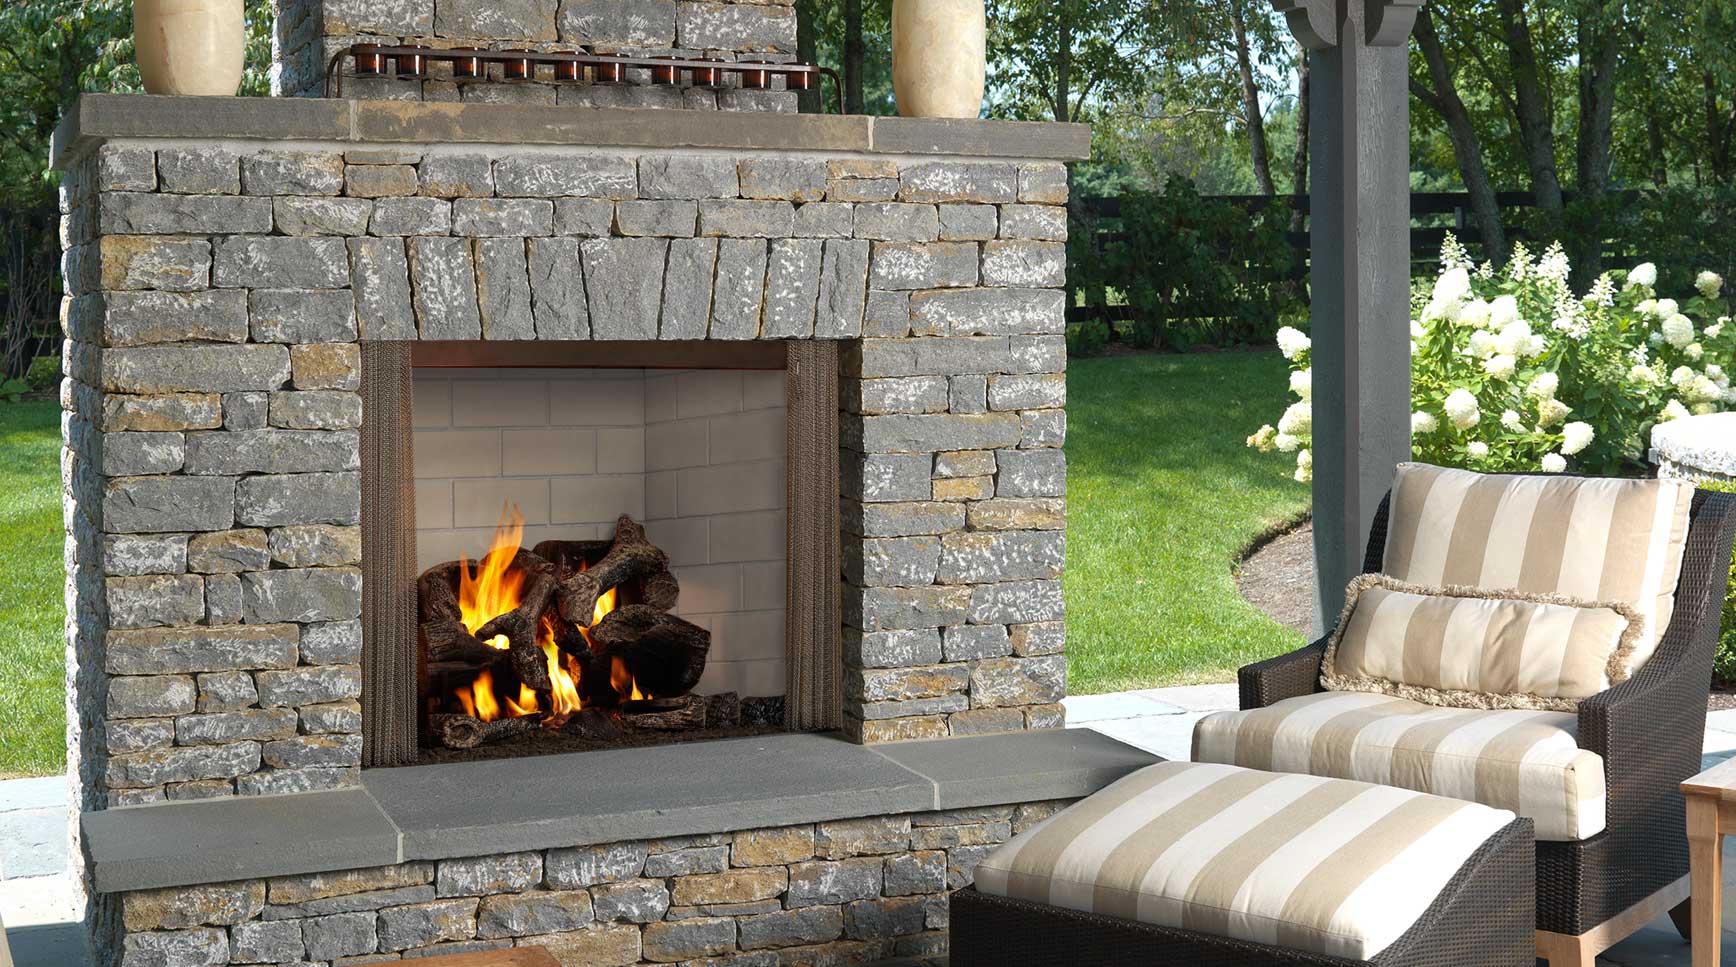 With large opening and textured brick interior, your fireplace will provide...